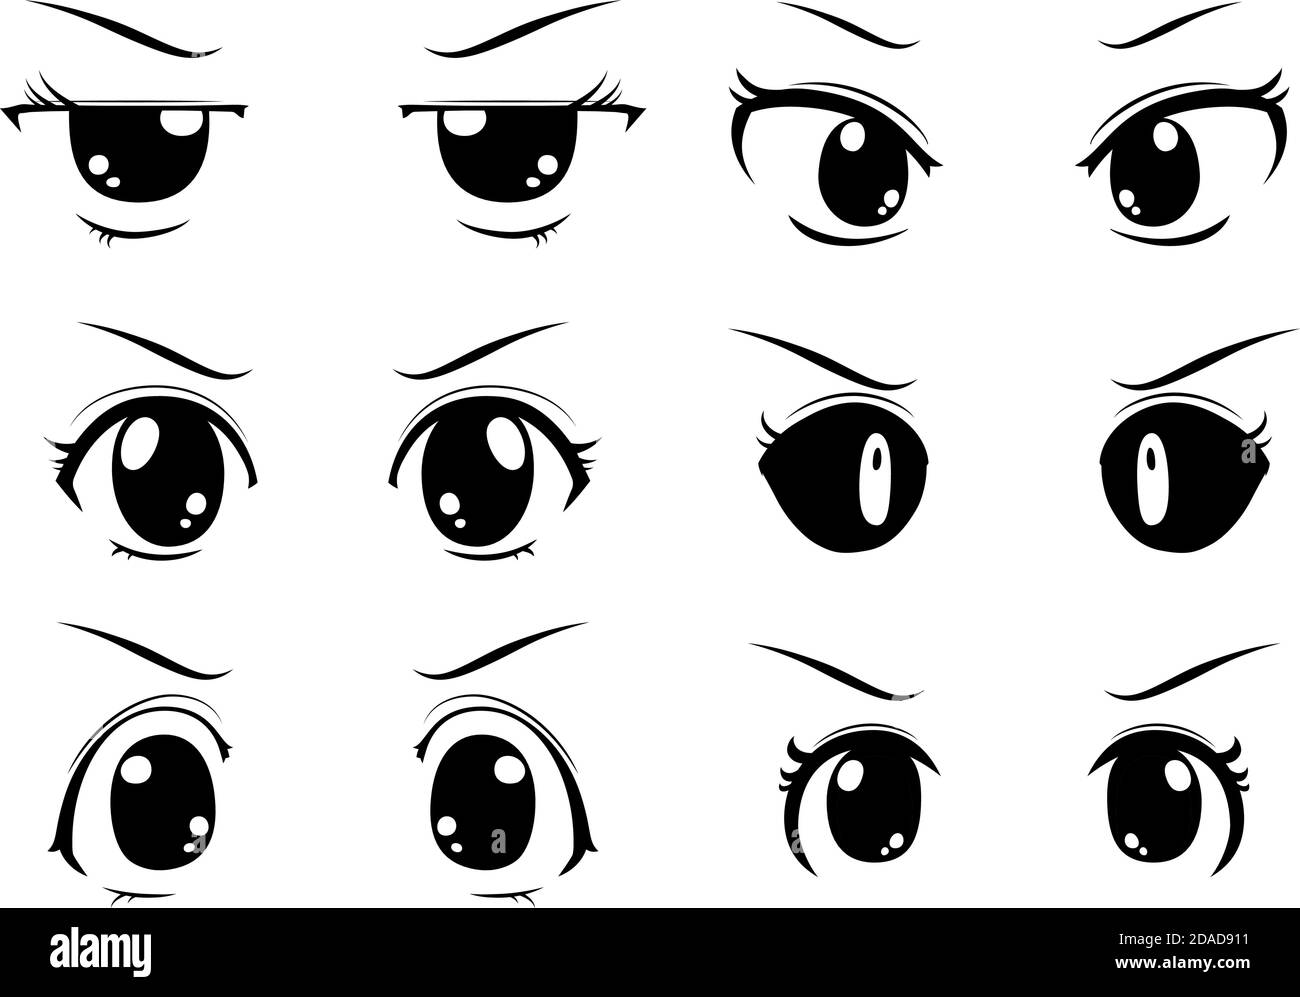 How to Draw Anime Eyes  Really Easy Drawing Tutorial